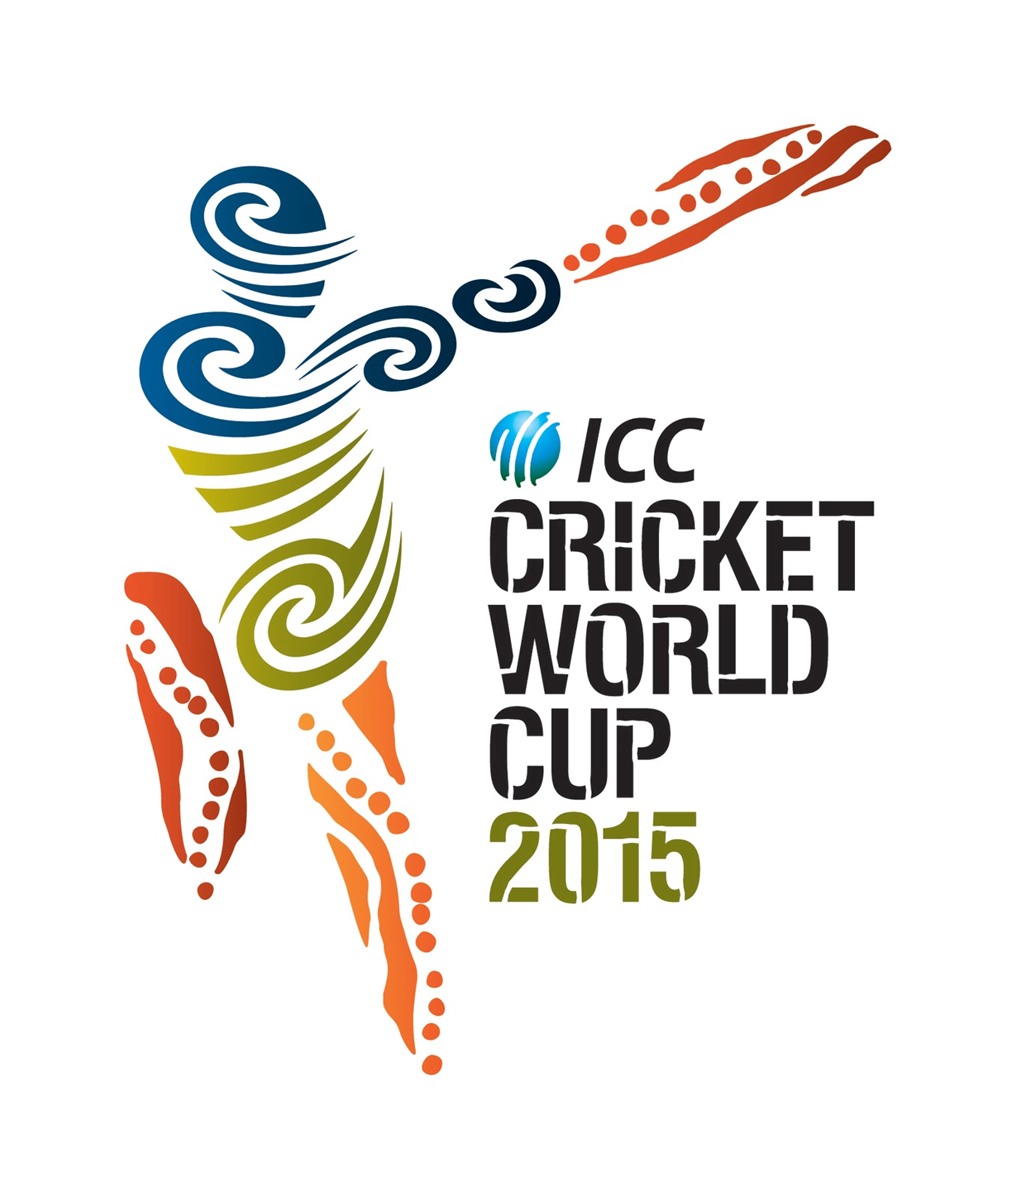 ICC cricket world cup, NZ homestay, accommodation, Home hosted  